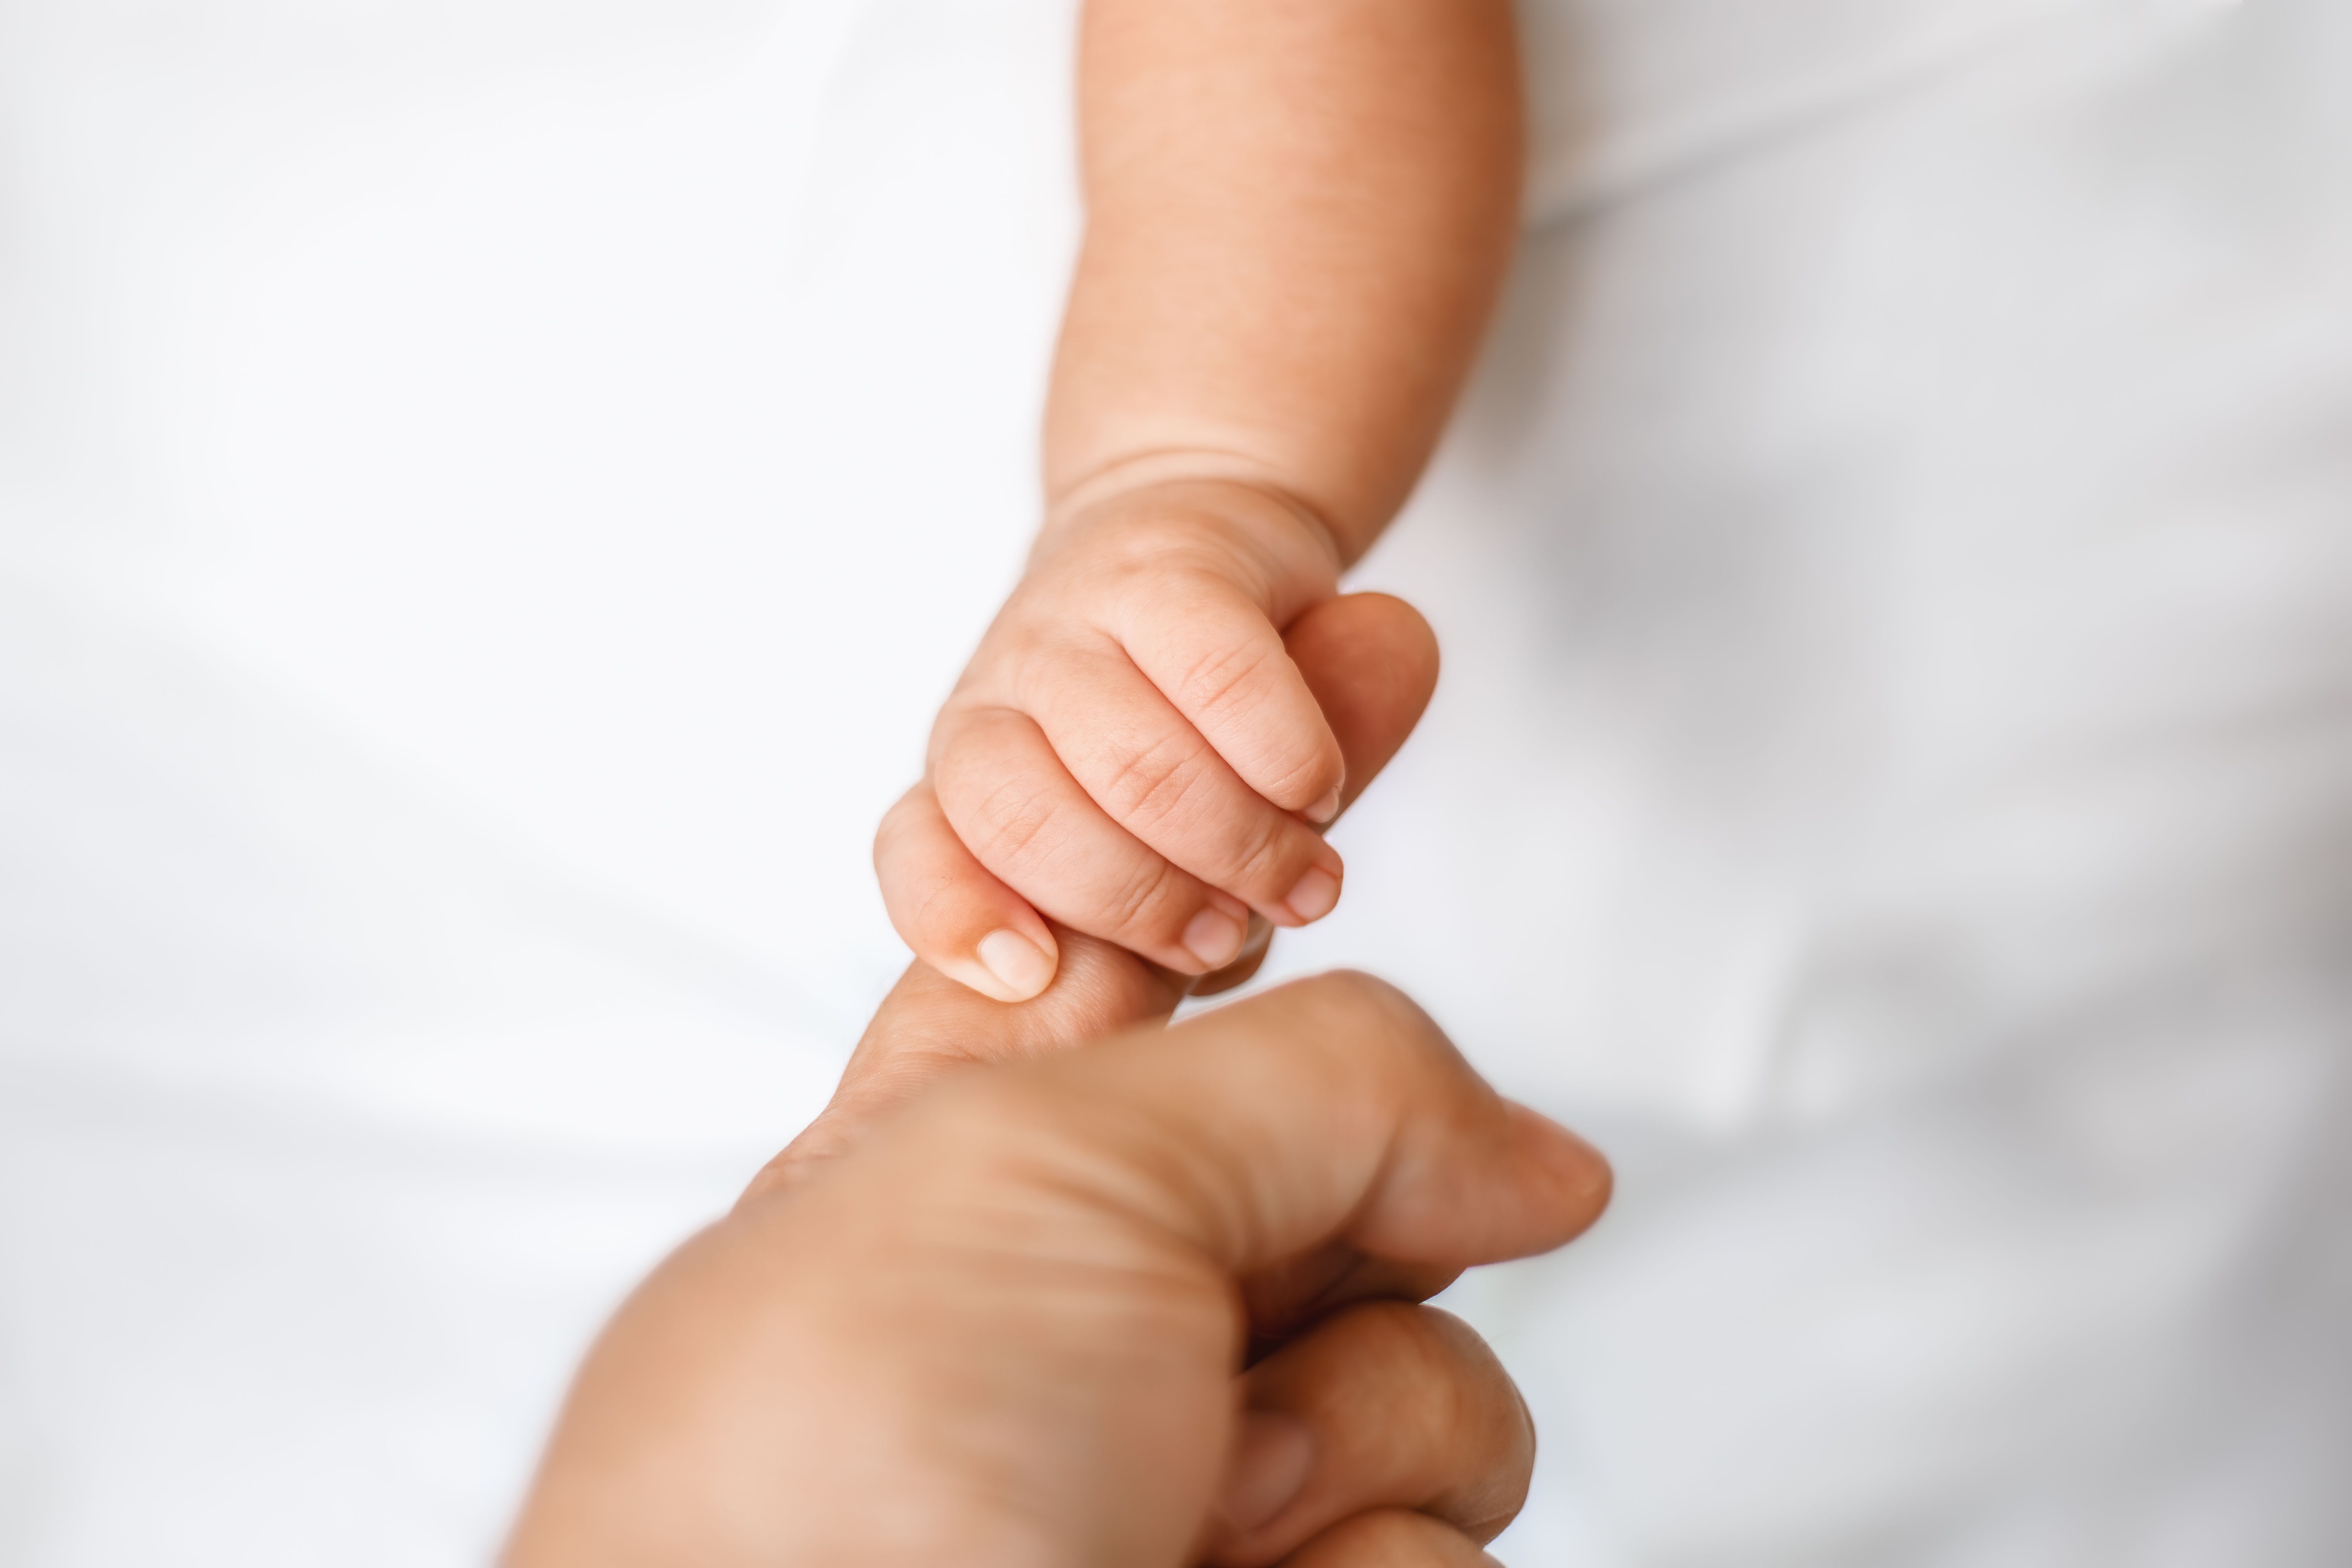 A baby holding an adult's finger. | Source: Getty Images